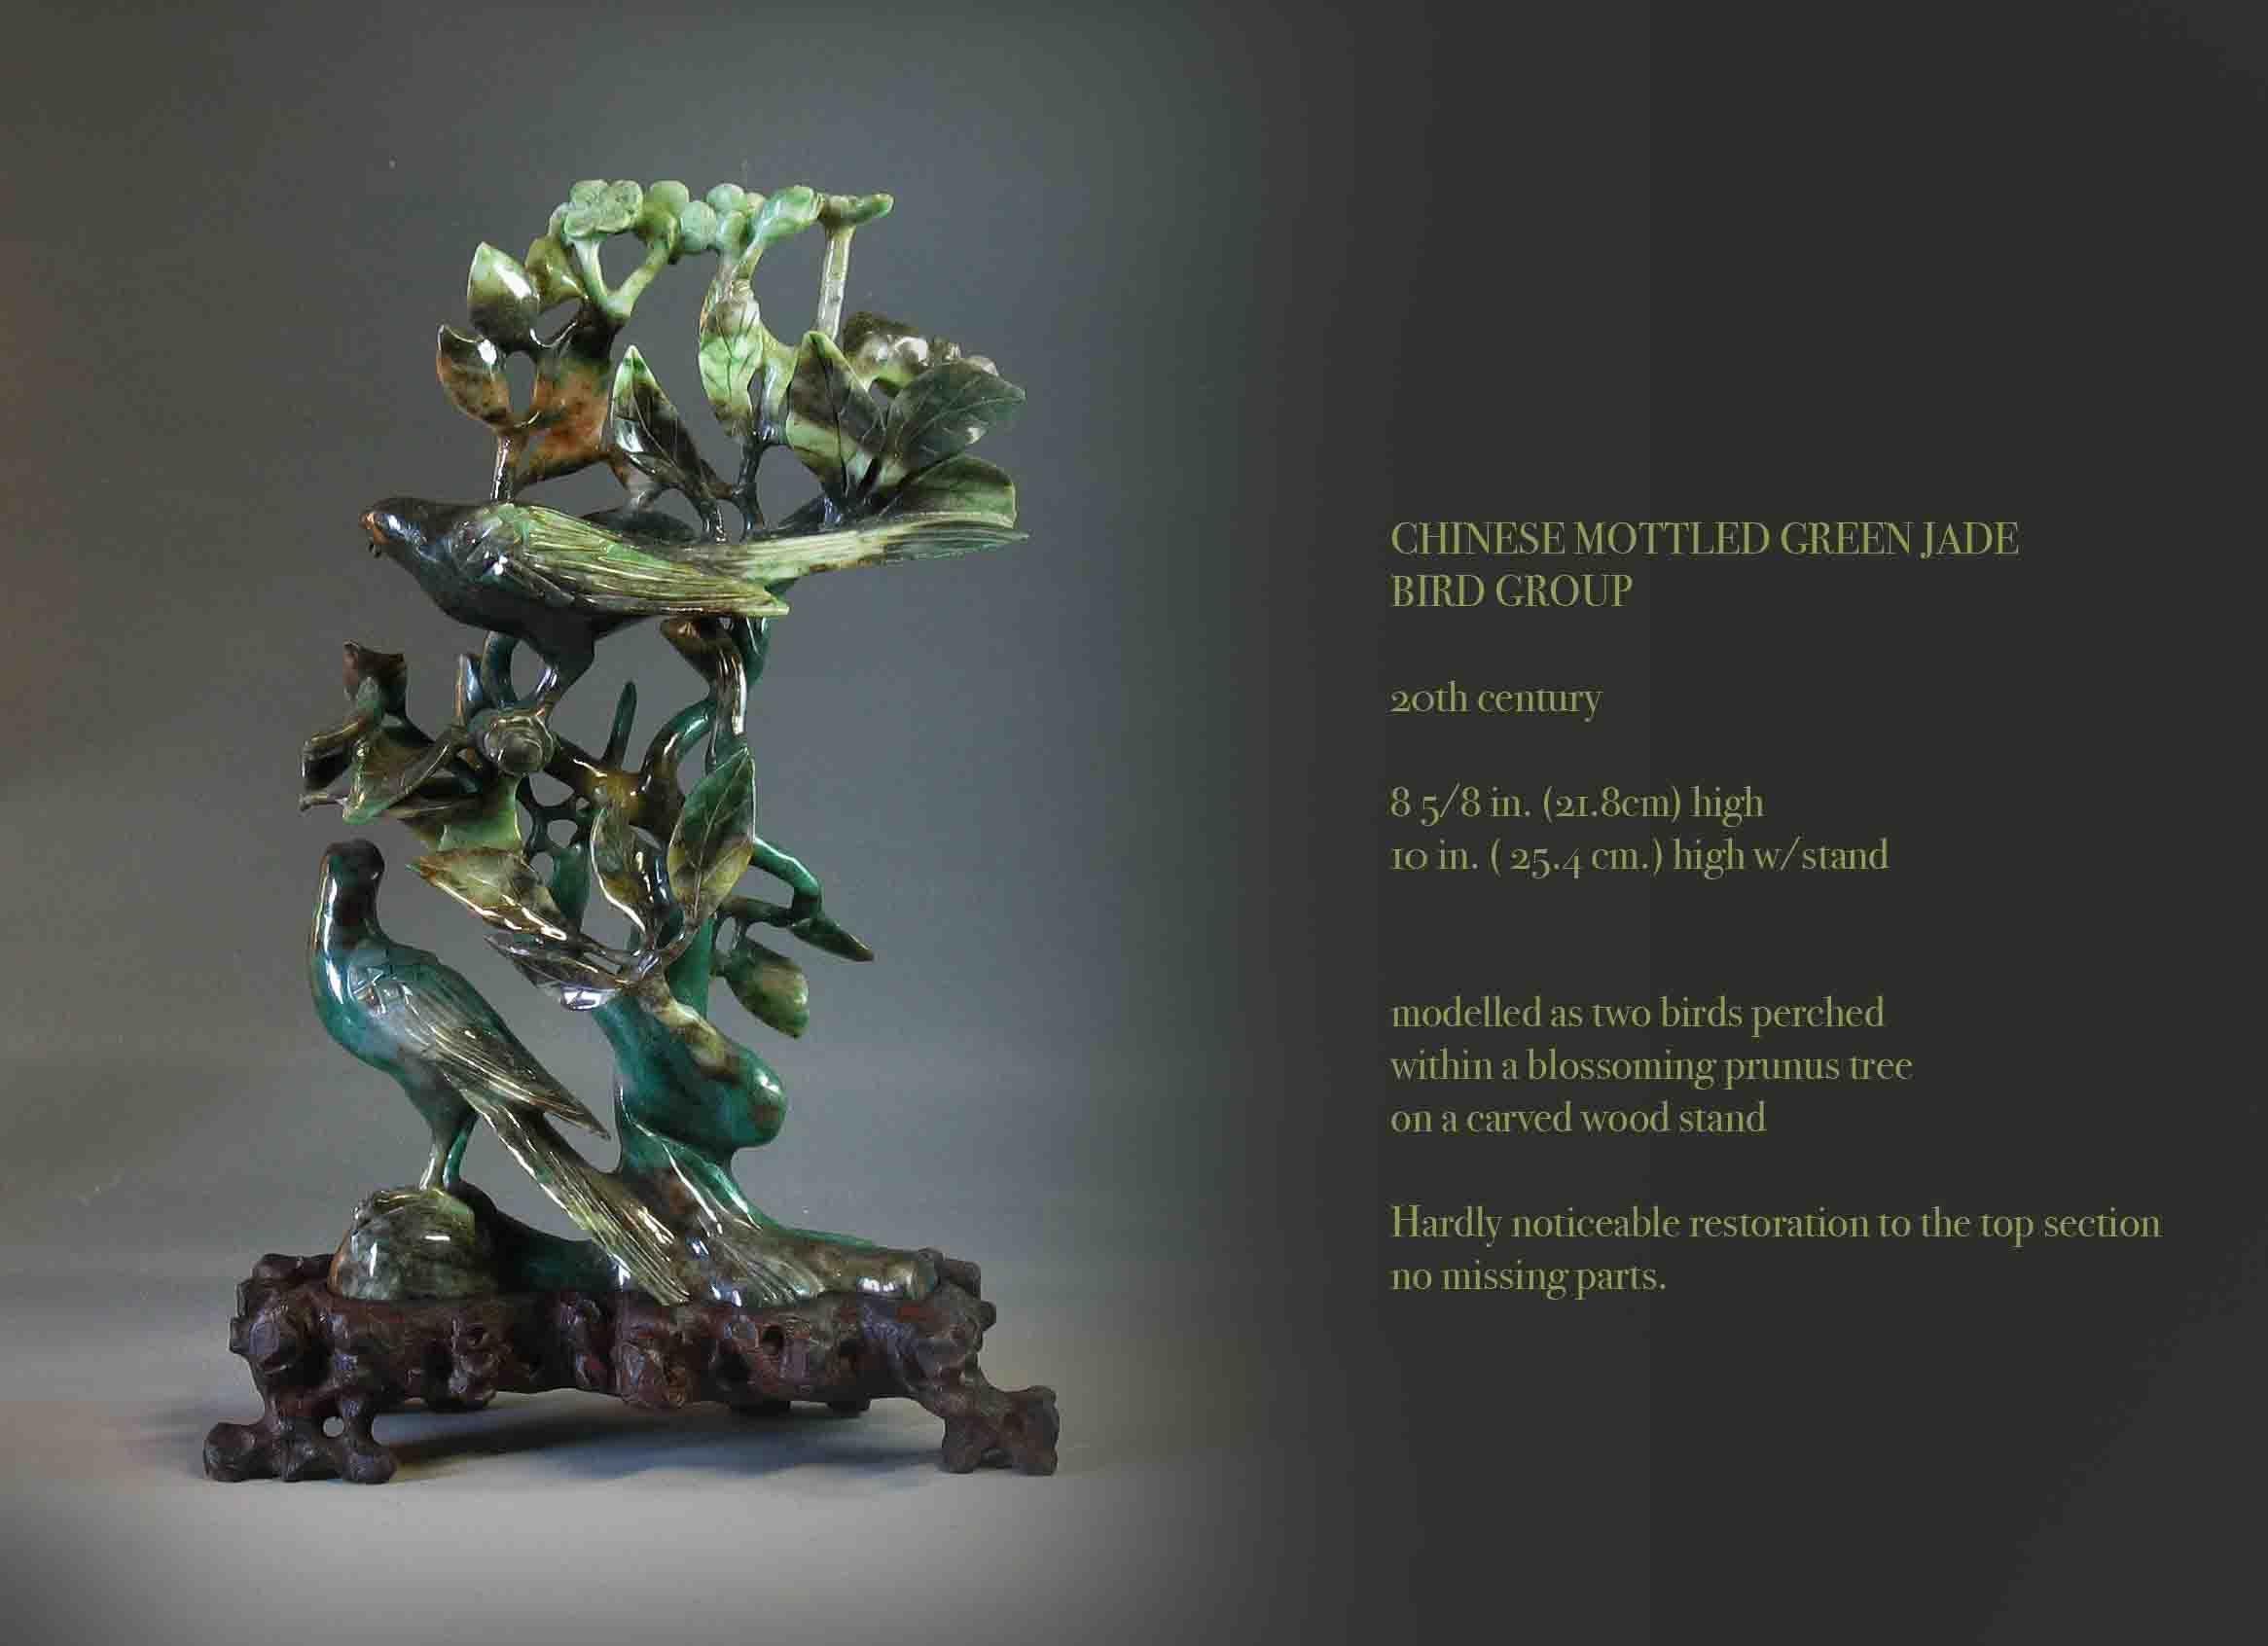 Chinese mottled green jade
Bird grouping

20th century.

Measures: 8 5/8 in. (21.8cm) high
10 in. ( 25.4 cm.) high w/stand.


Modelled as two birds perched 
within a blossoming prunus tree
on a carved wood stand.

Hardly noticeable